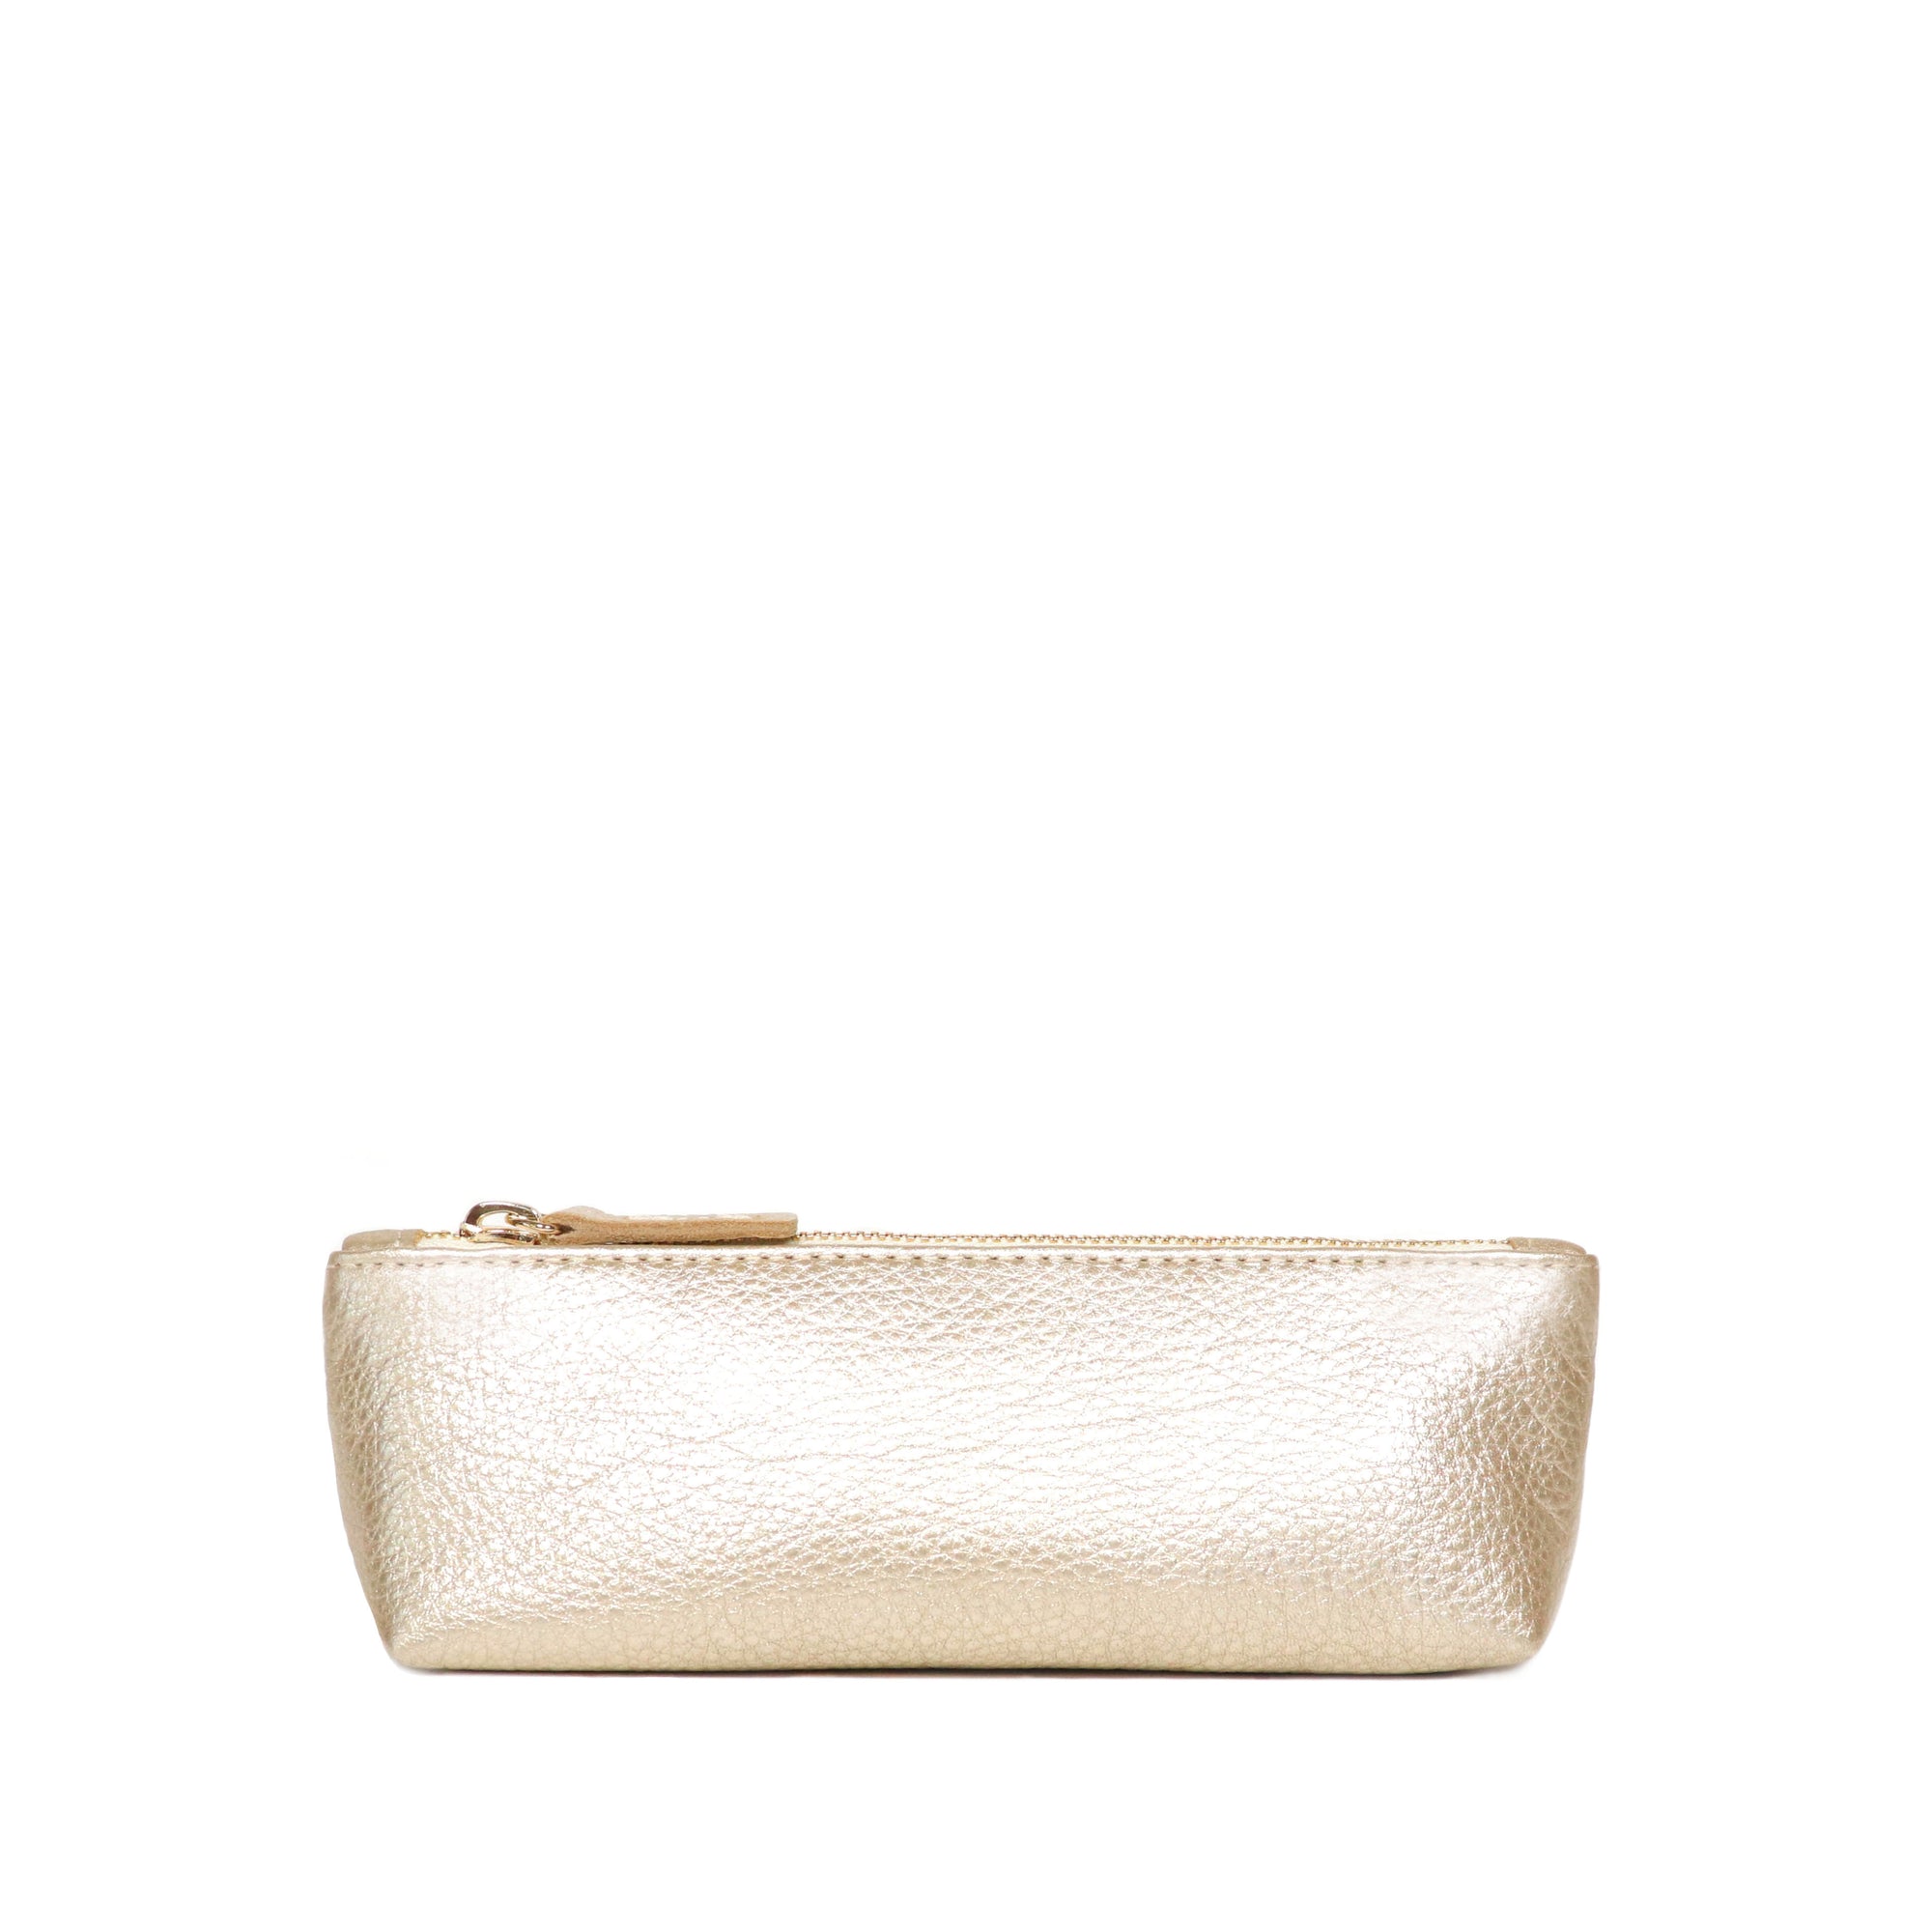 Pismo Pouch - leather zipper pouch in champagne metallic leather.  Made in U.S.A. by Jana Kay. 